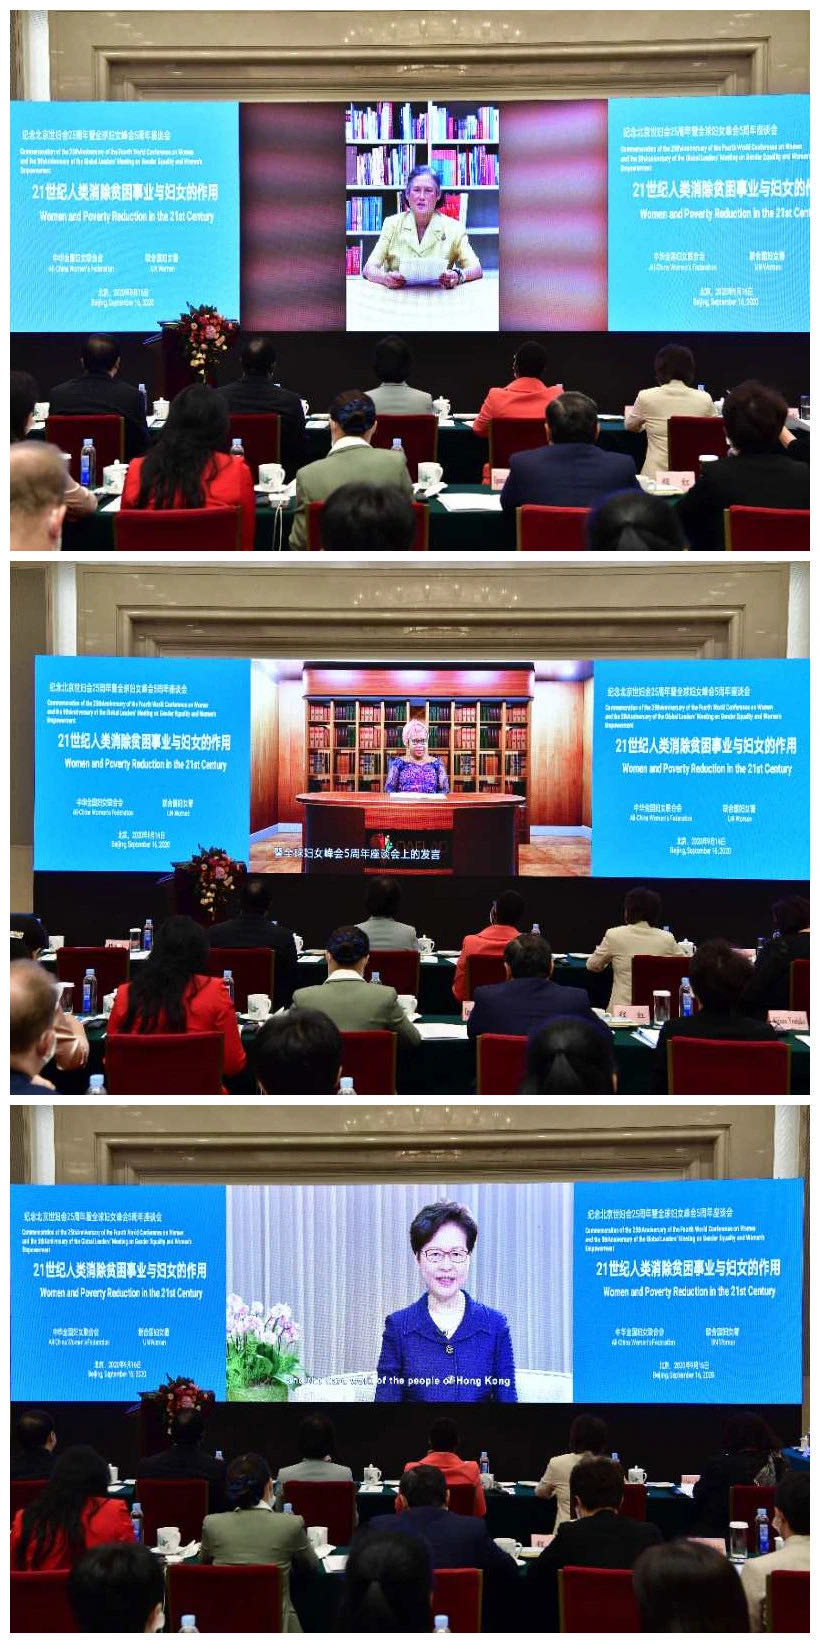 Meeting in Beijing Commemorates the 25th Anniversary of the Fourth World Conference on Women and the 5th Anniversary of the Global Leaders' Meeting on Gender Equality and Women's Empowerment